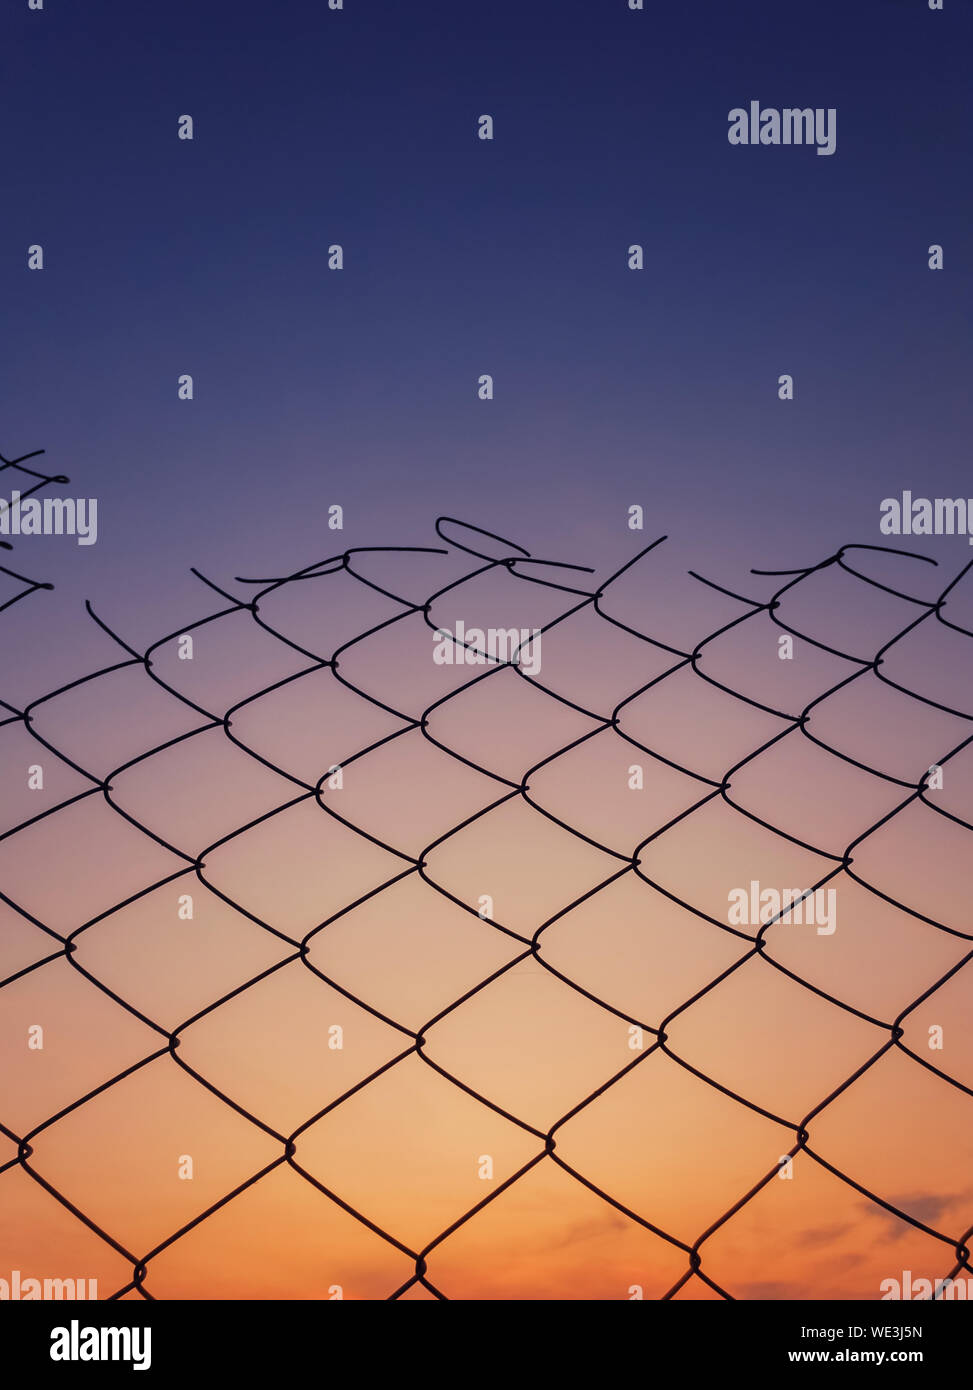 Old wire mesh fence texture against sunset sky background. Stock Photo